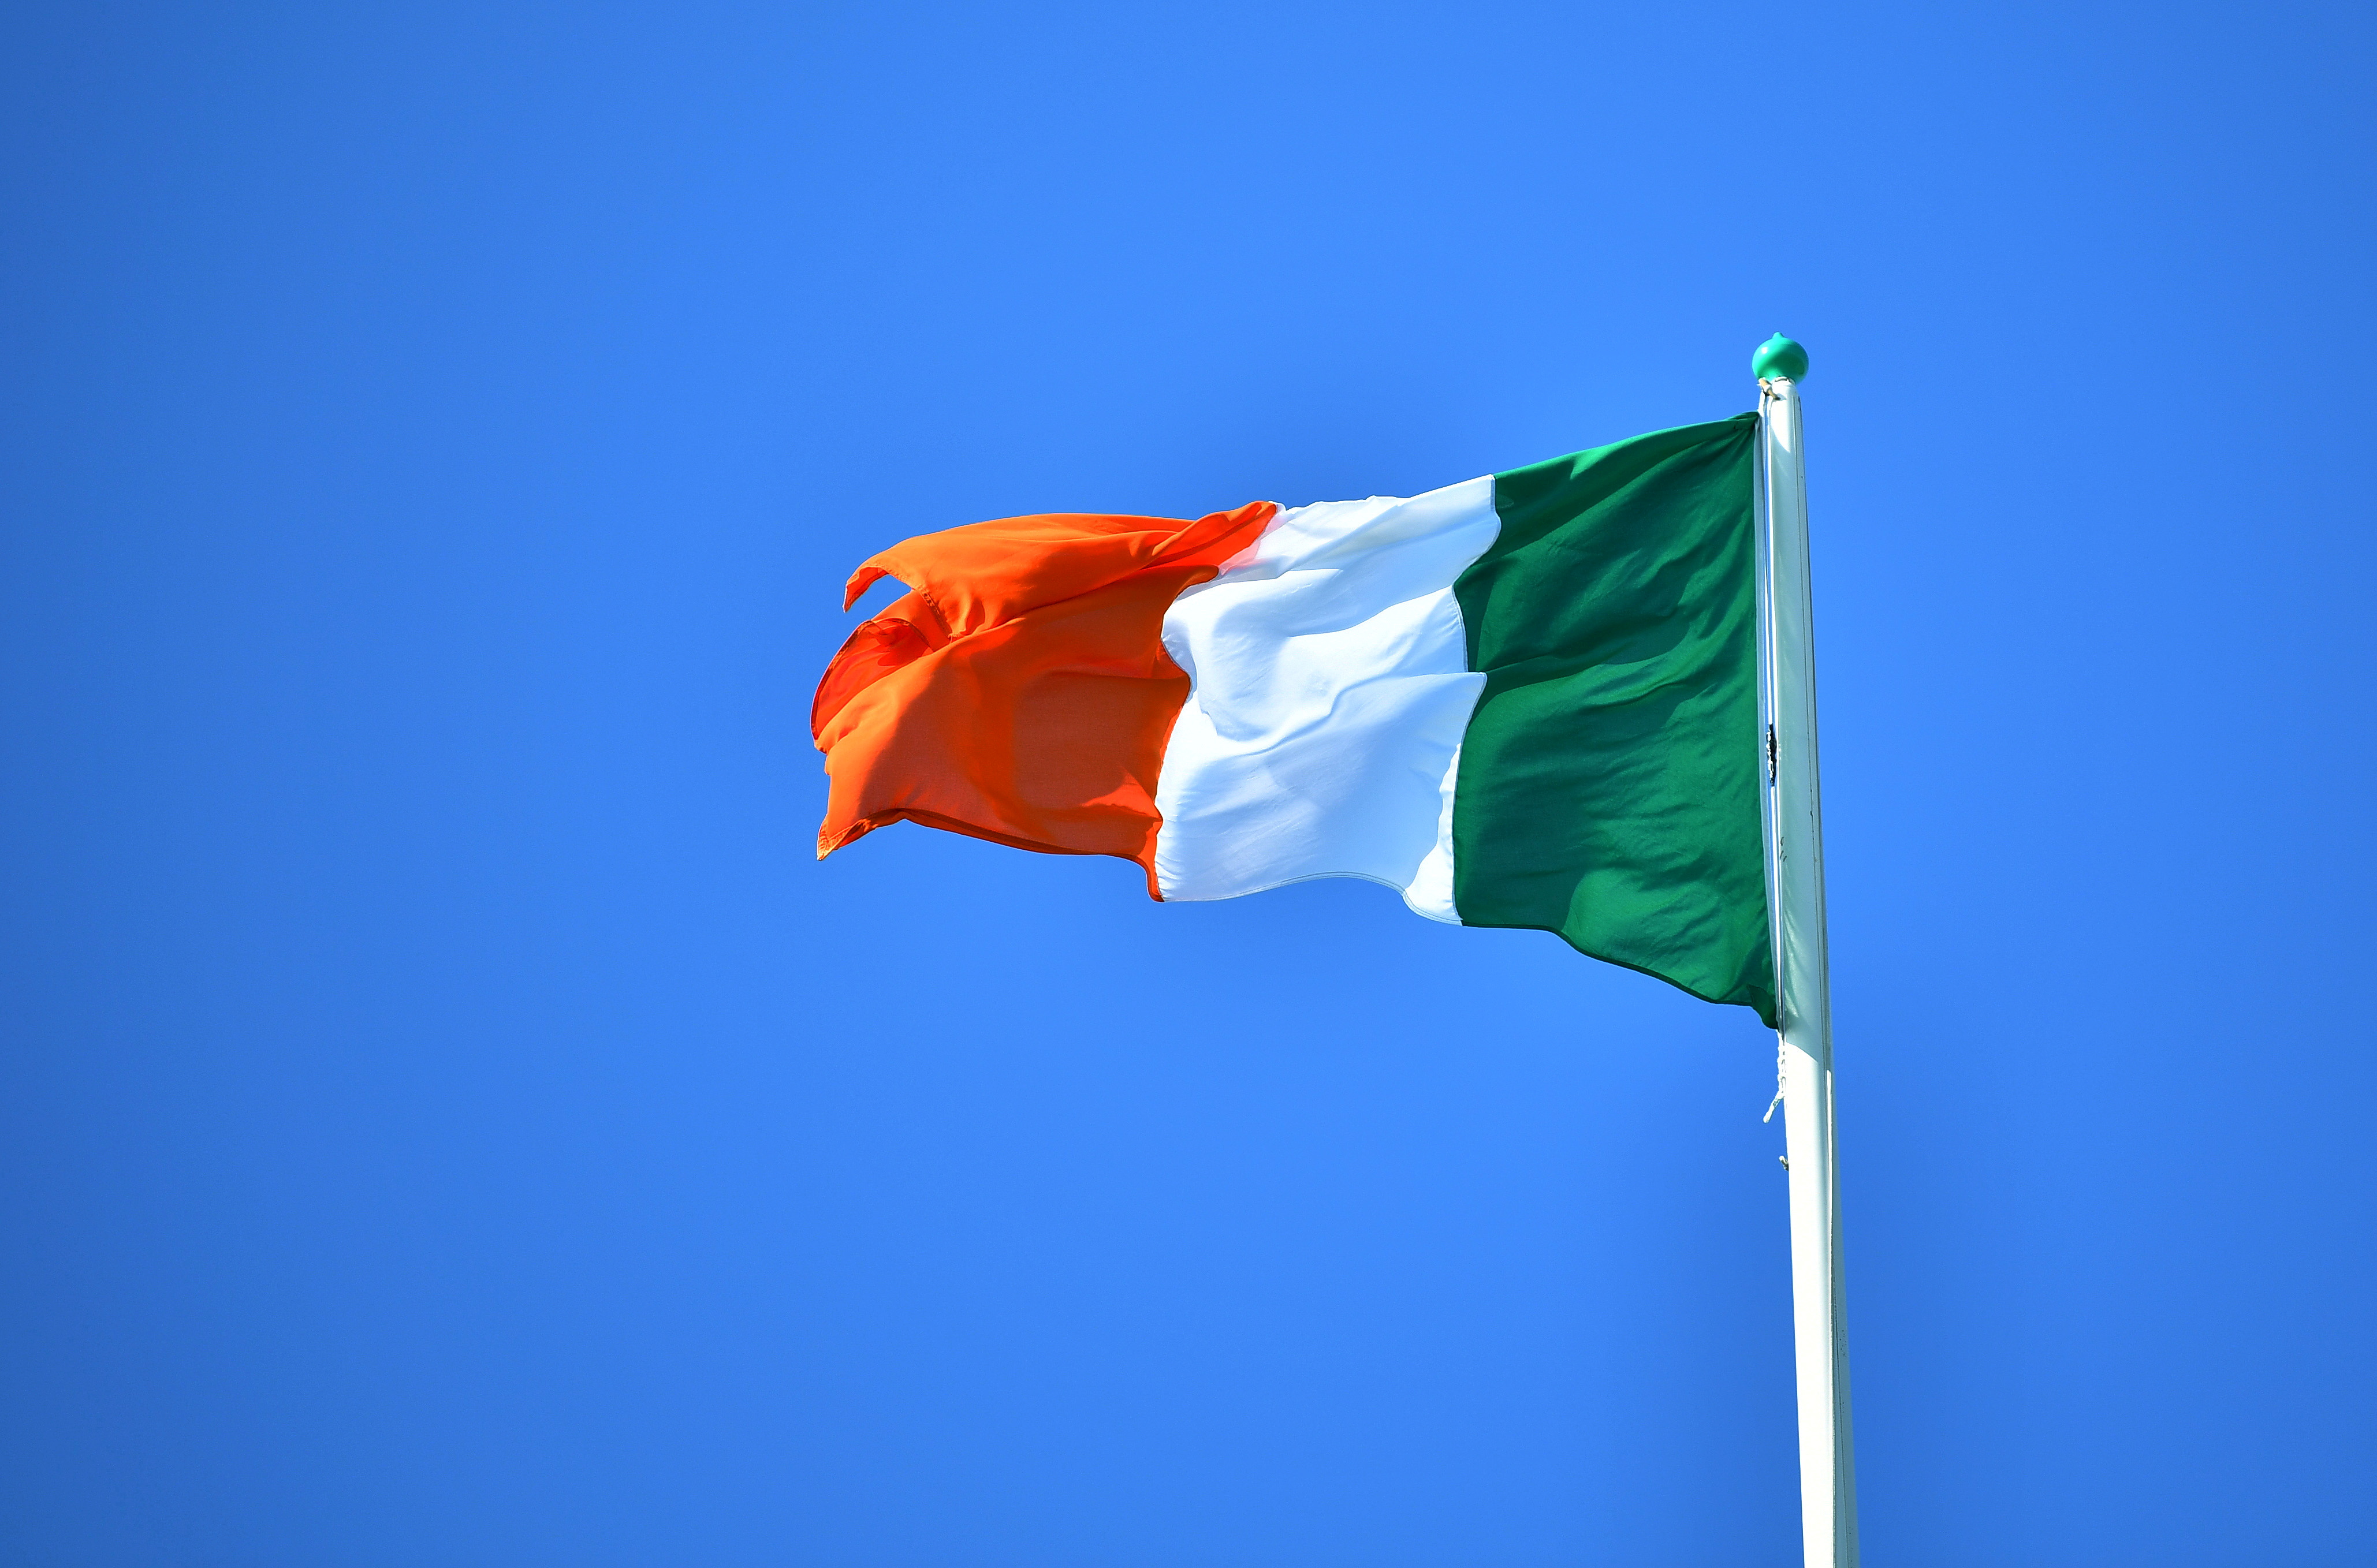 National flag of Ireland flies above the President's residence, ahead of the arrival of Pope Francis, in Dublin